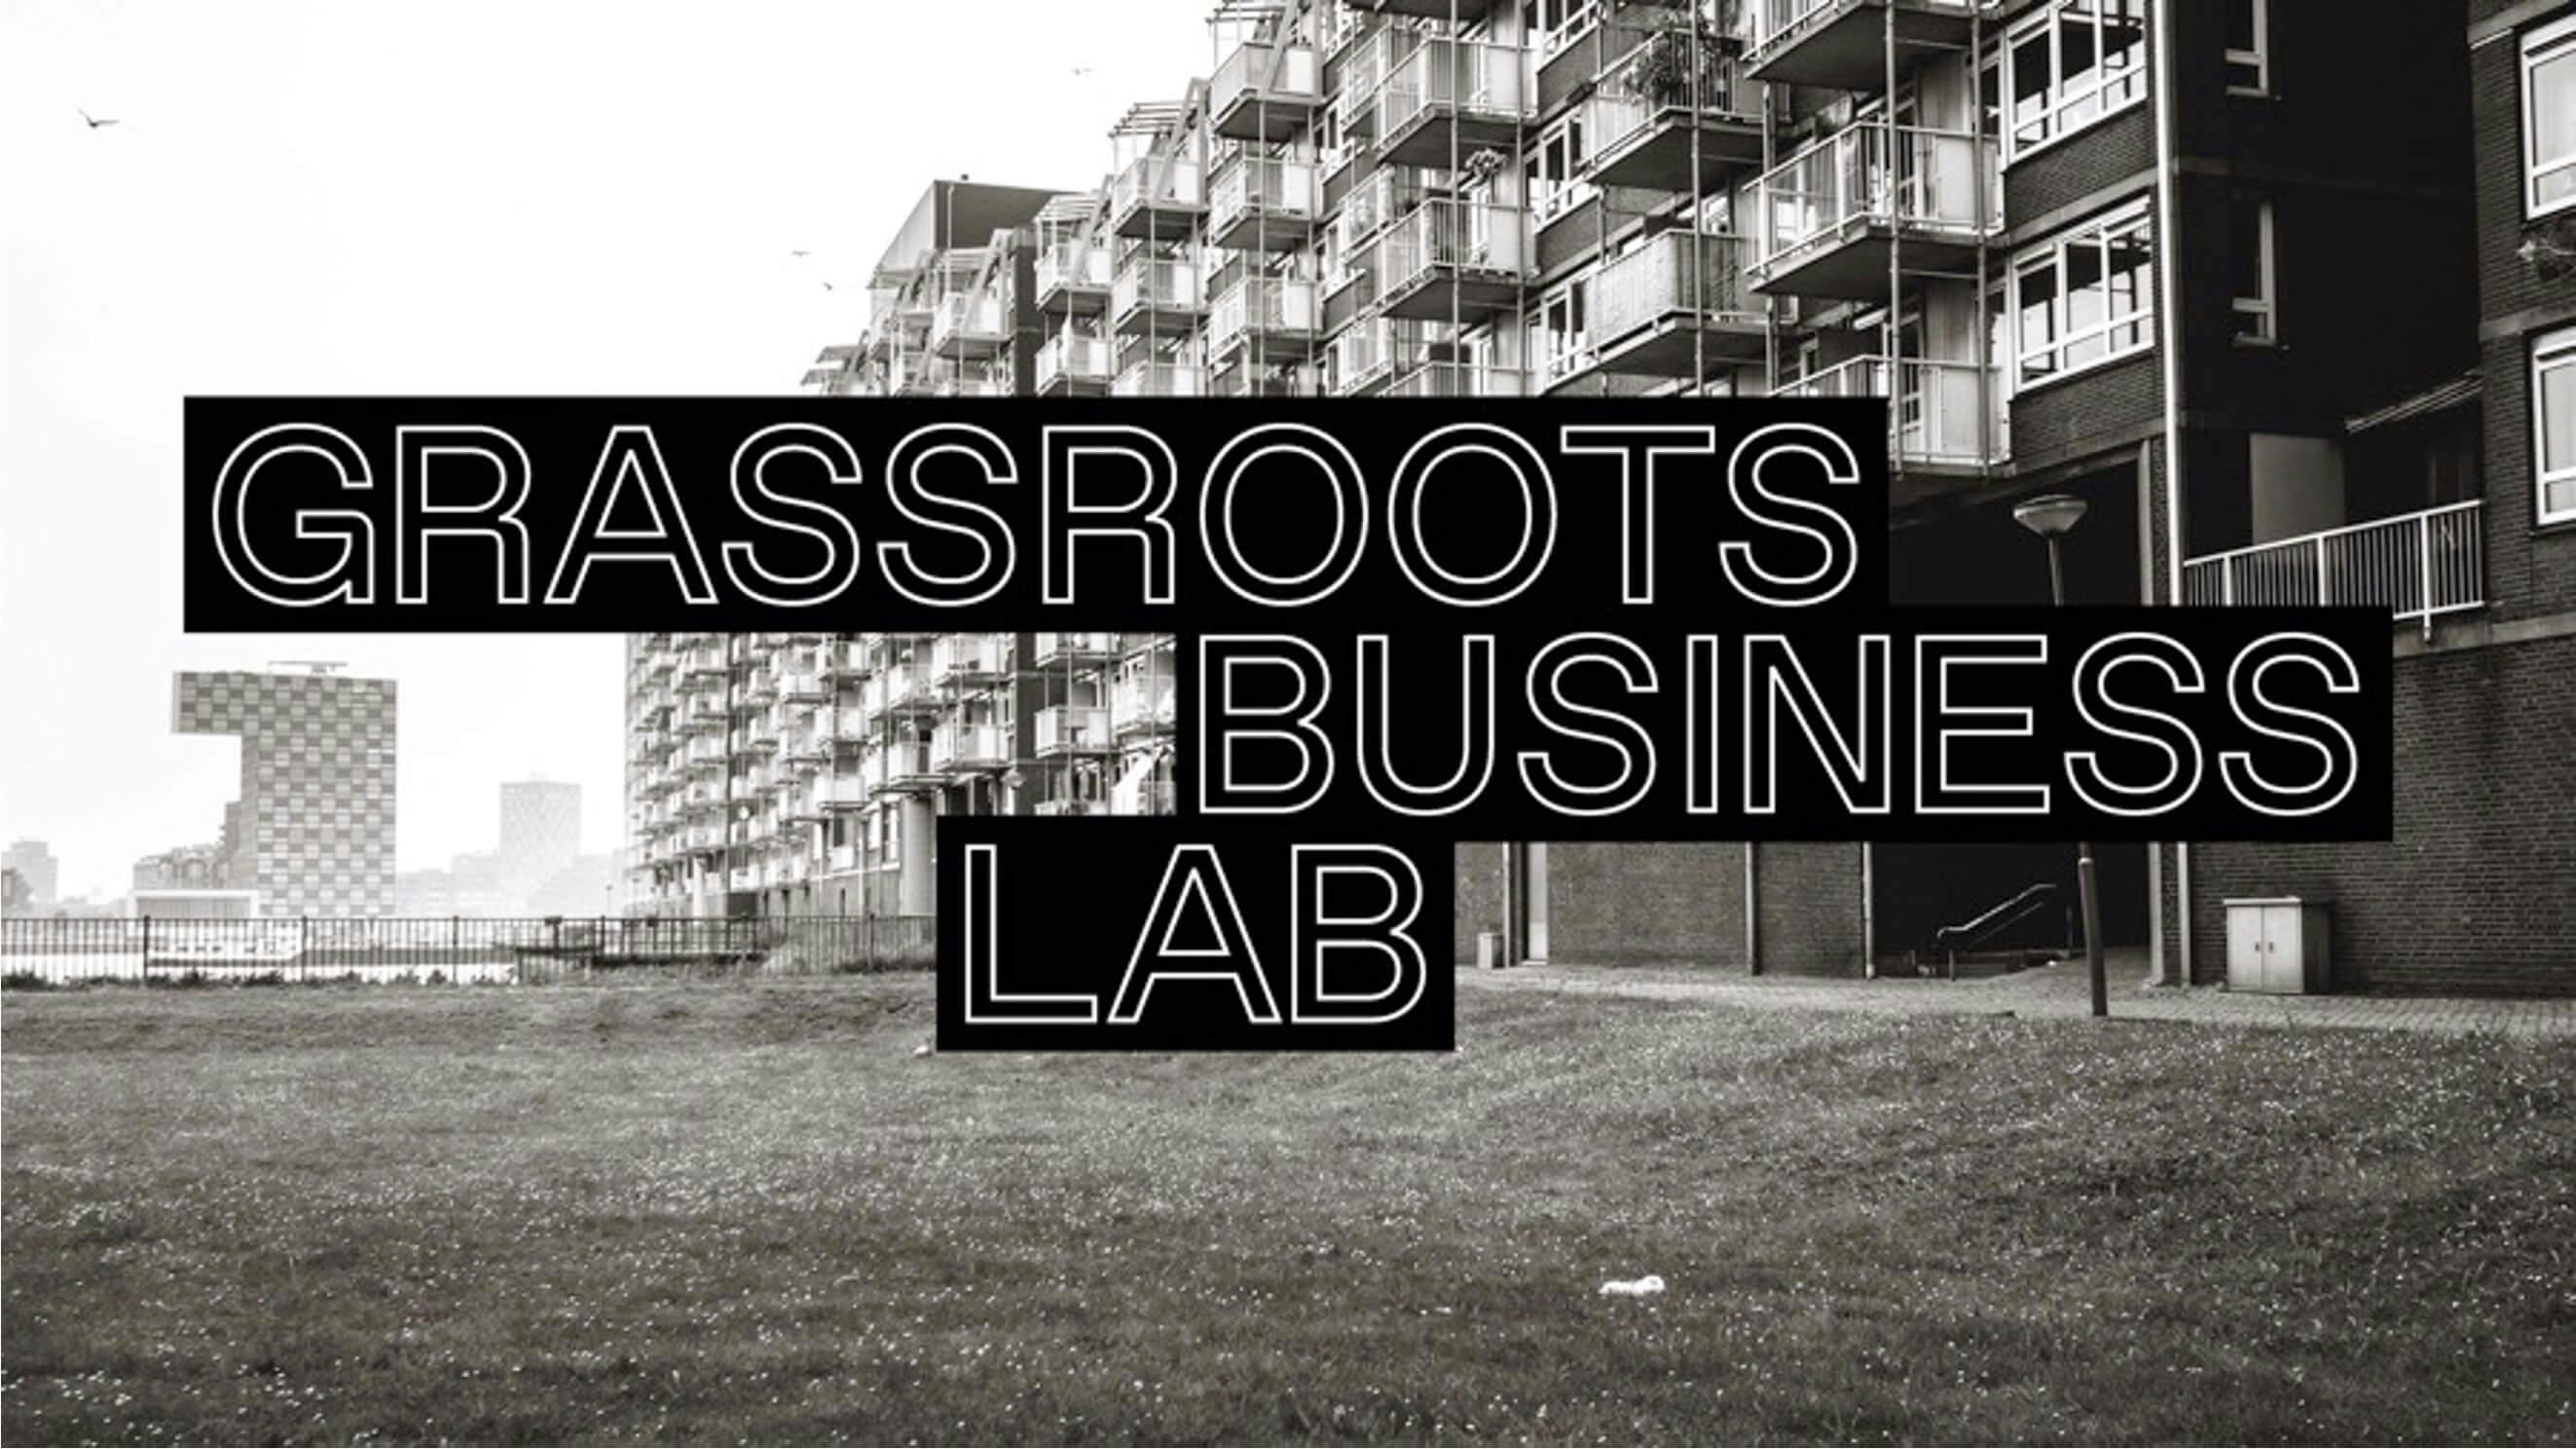 GrassRoots Business LAB logo in black and white 